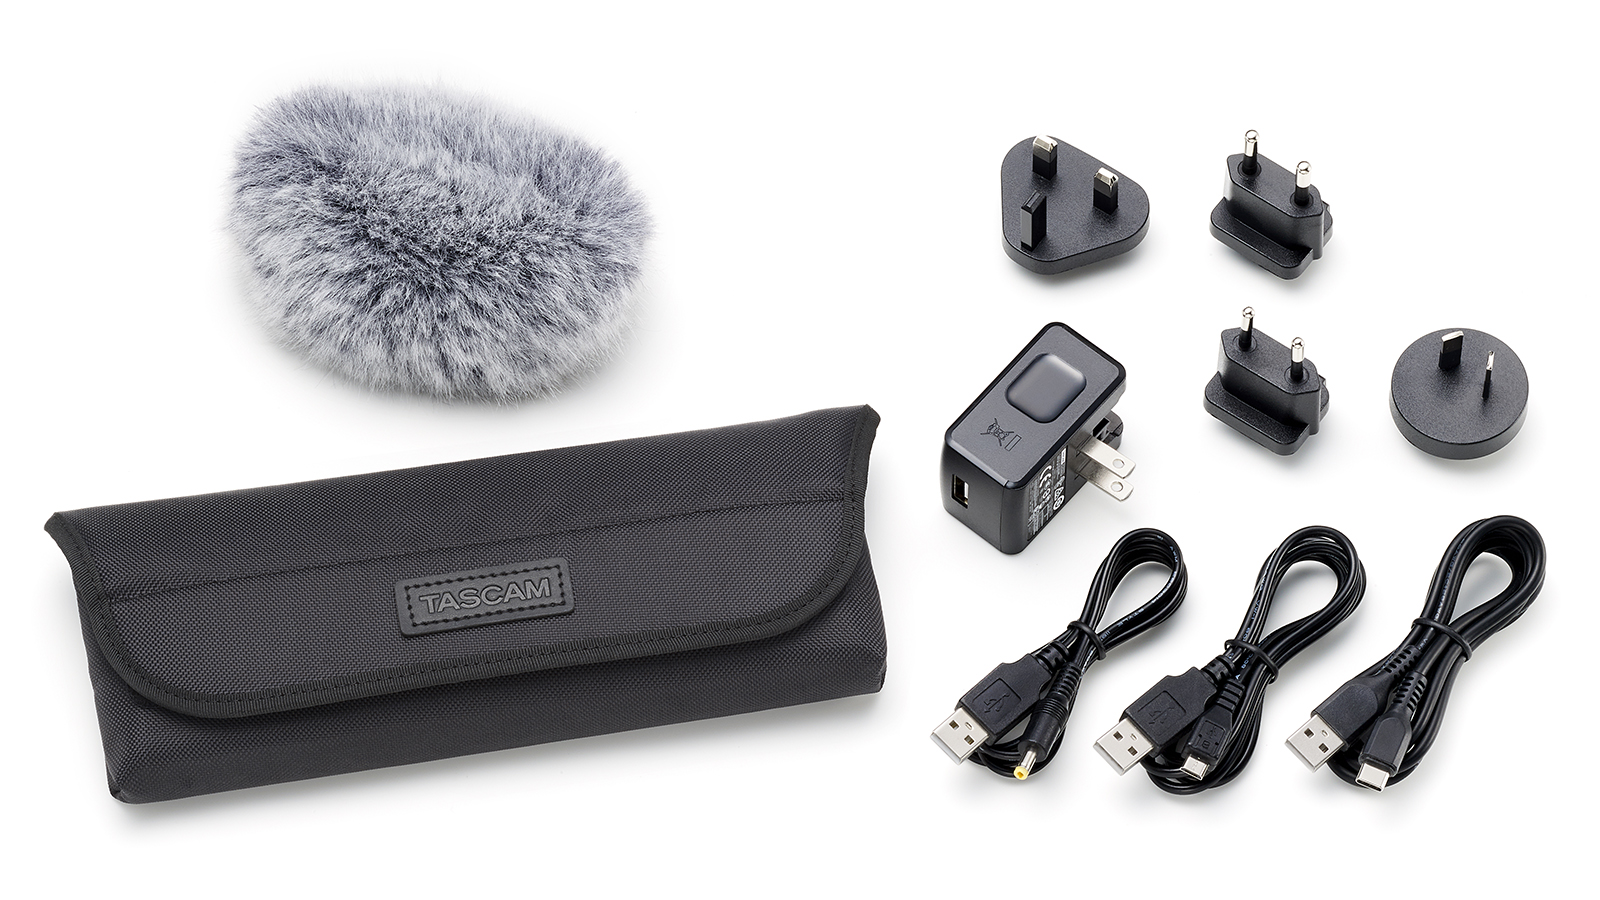 TASCAM Releases New Handheld Recorder Accessory Packs For DR